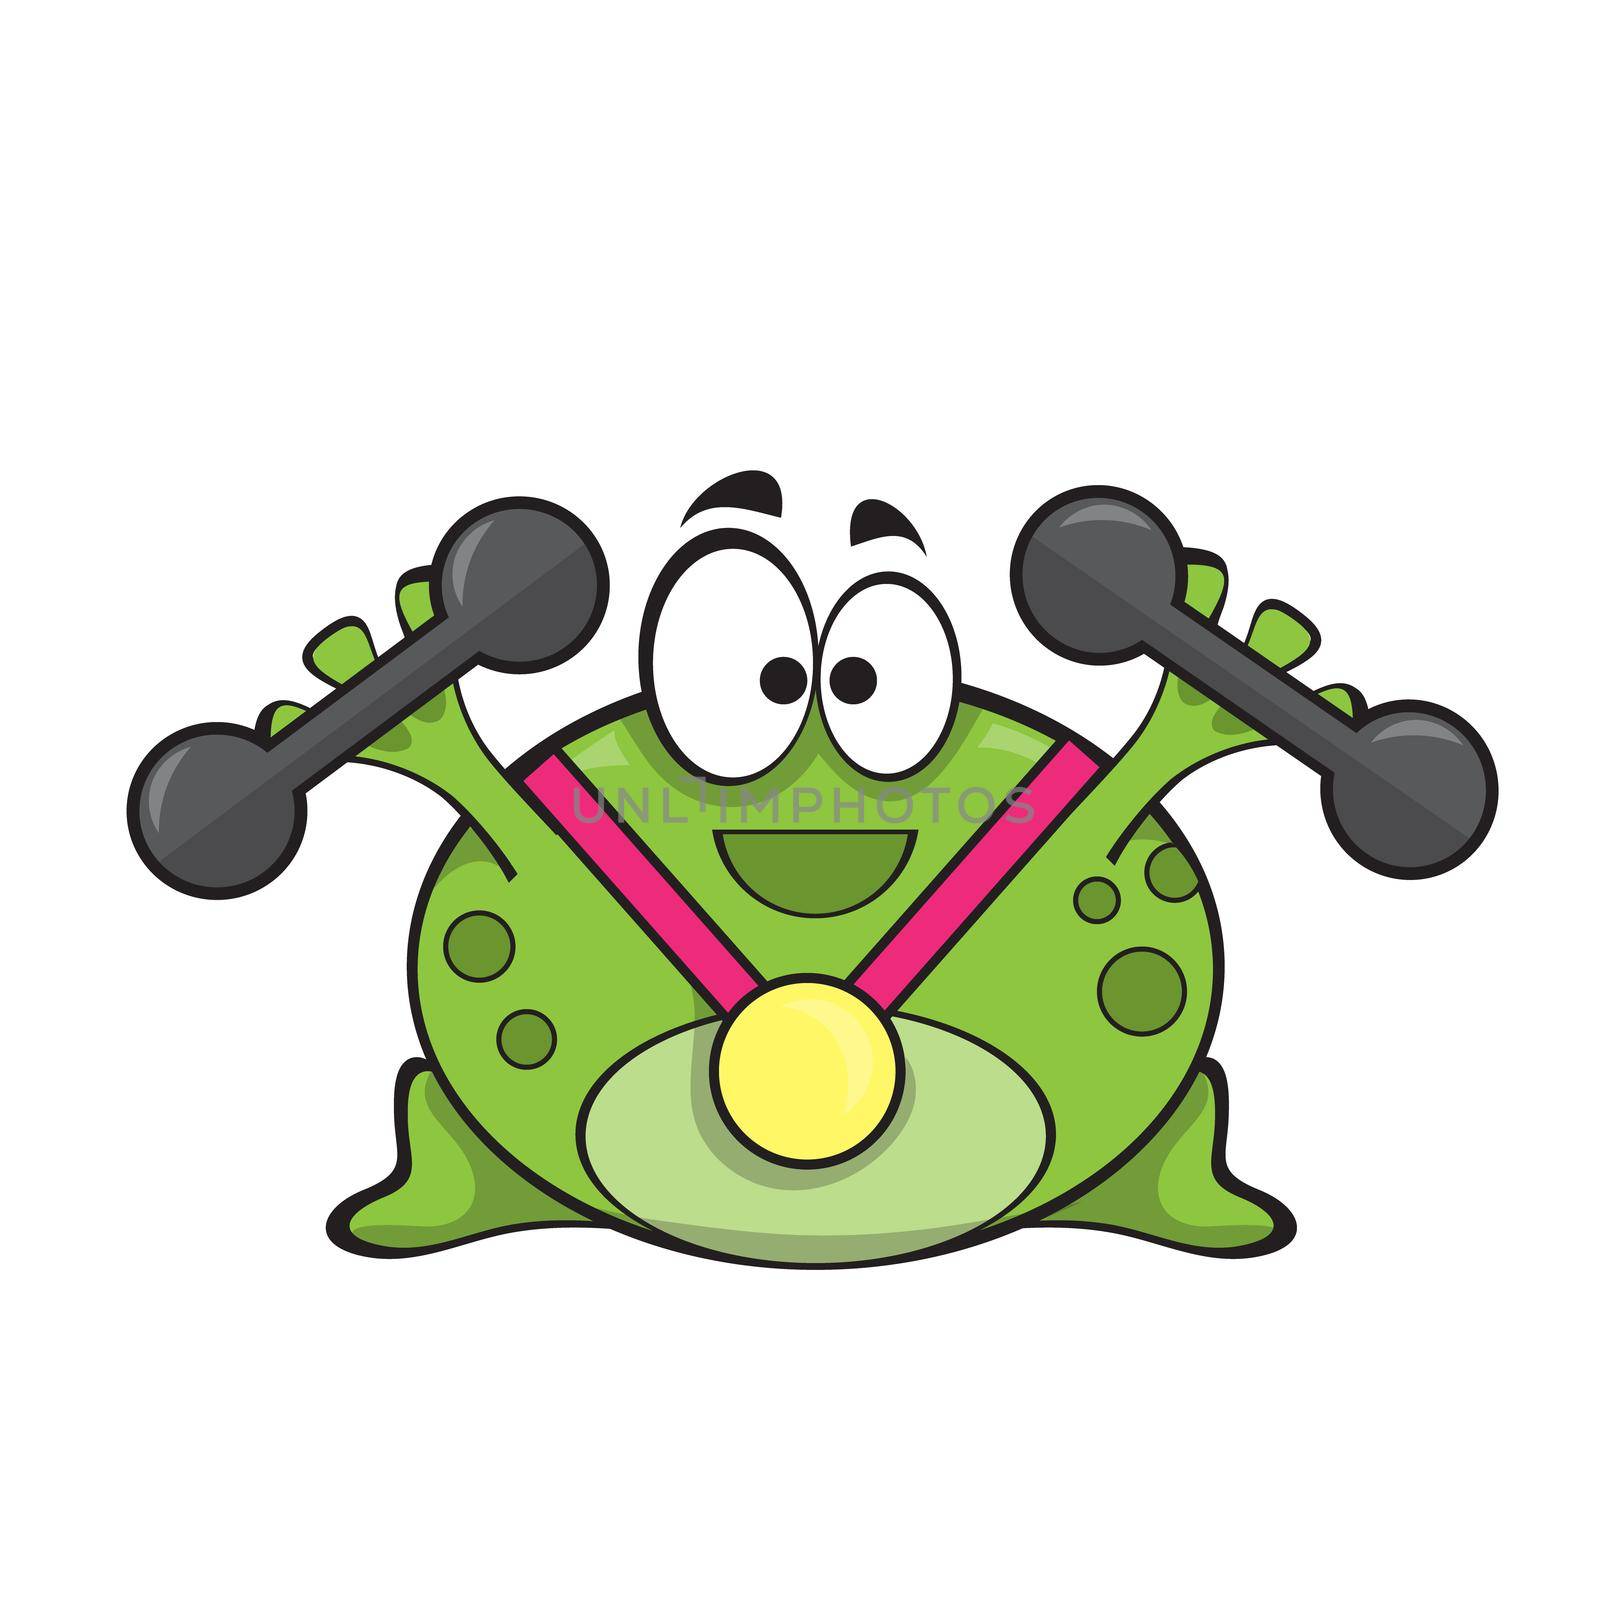 Cute frog with gold medal and dumbbell doing fitness exercise, vector cartoon character isolated on a white background.